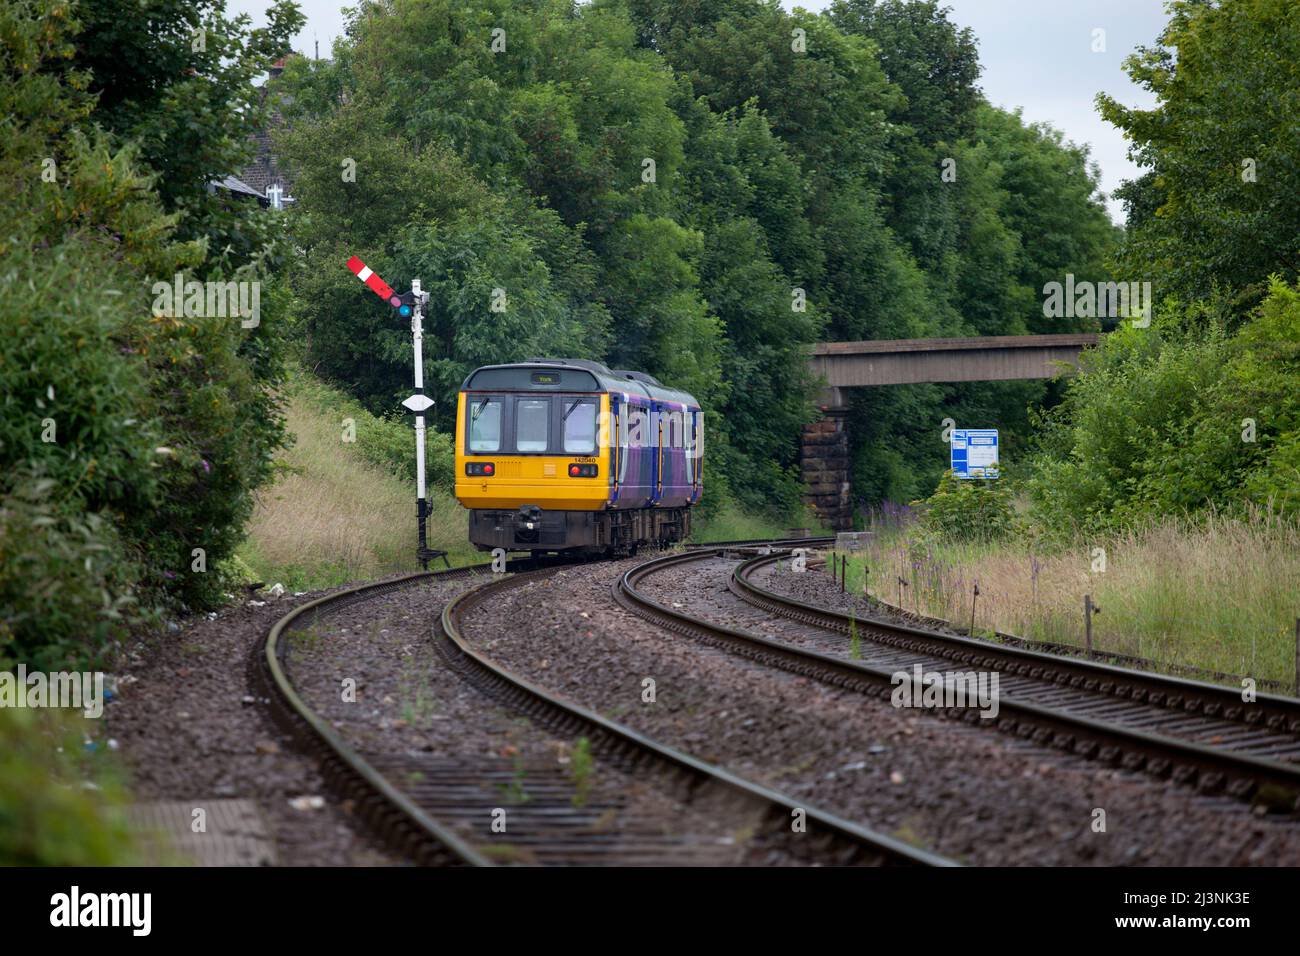 Northern Rail class 142 pacer train 142040 passing semaphore signals departing from Harrogate Stock Photo